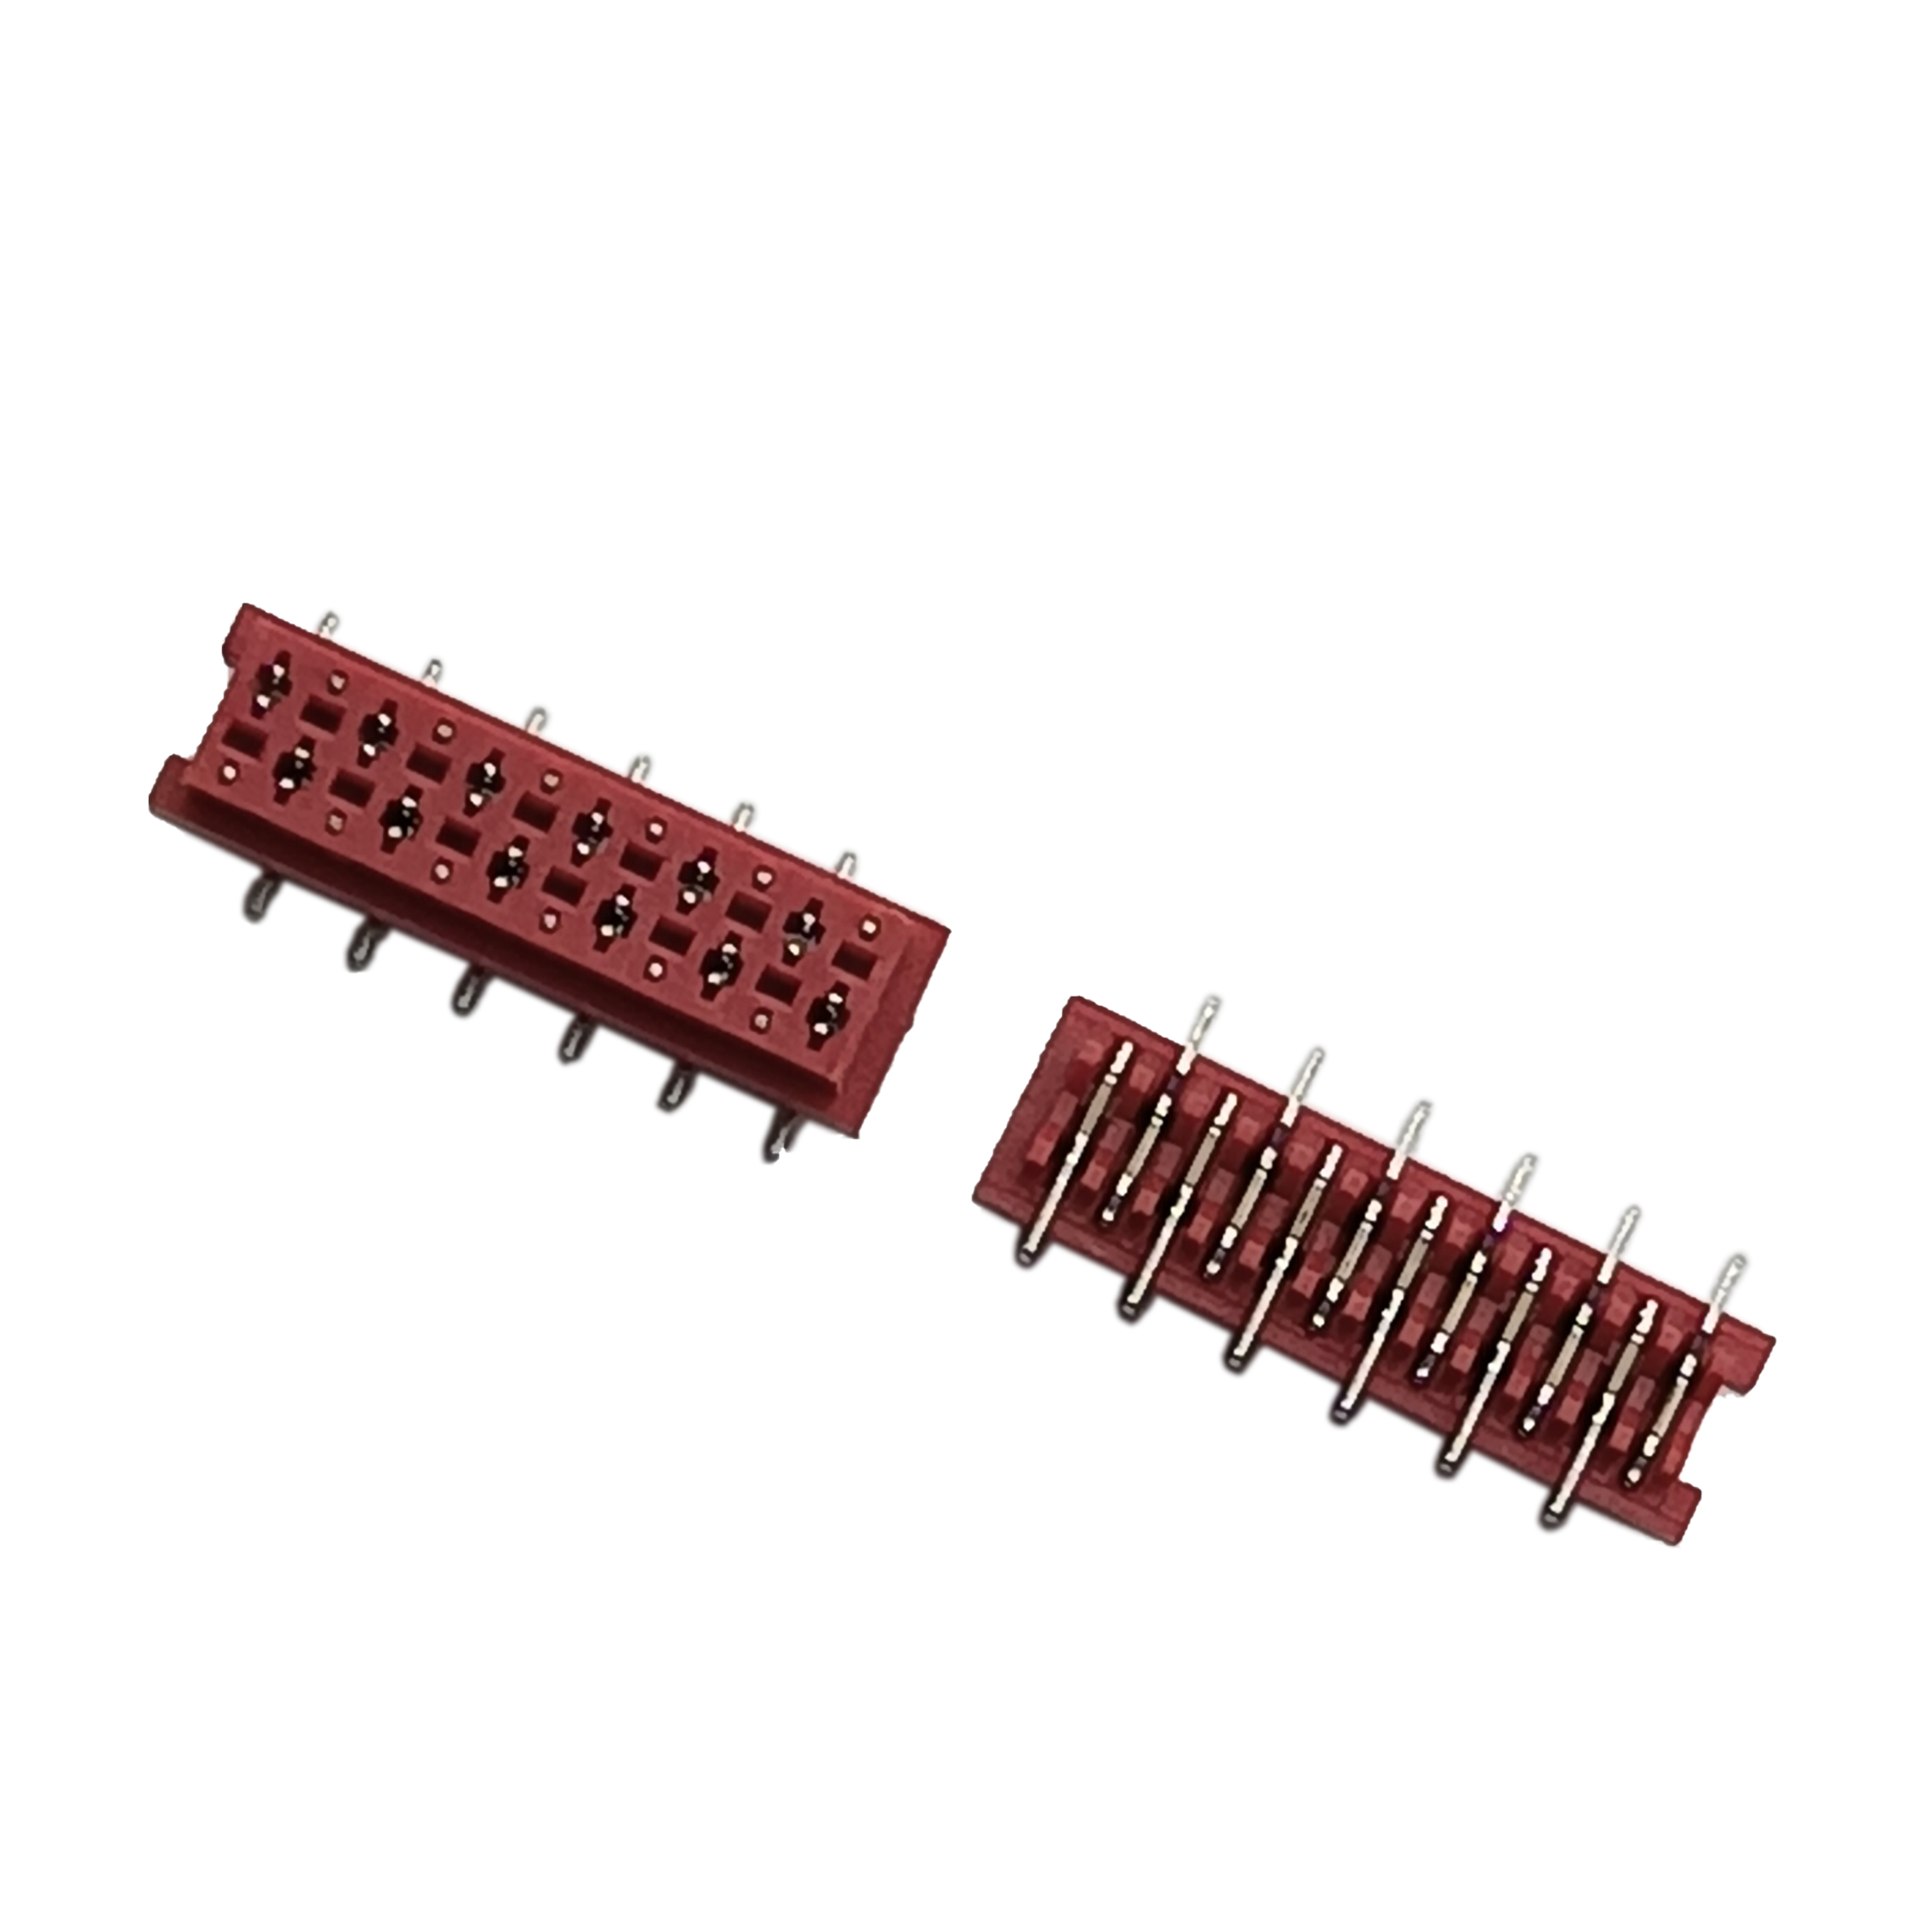 Micro-Match 8-188275-2: Precision 12-Position IDC Connector Plug for Seamless Electronic Connections.